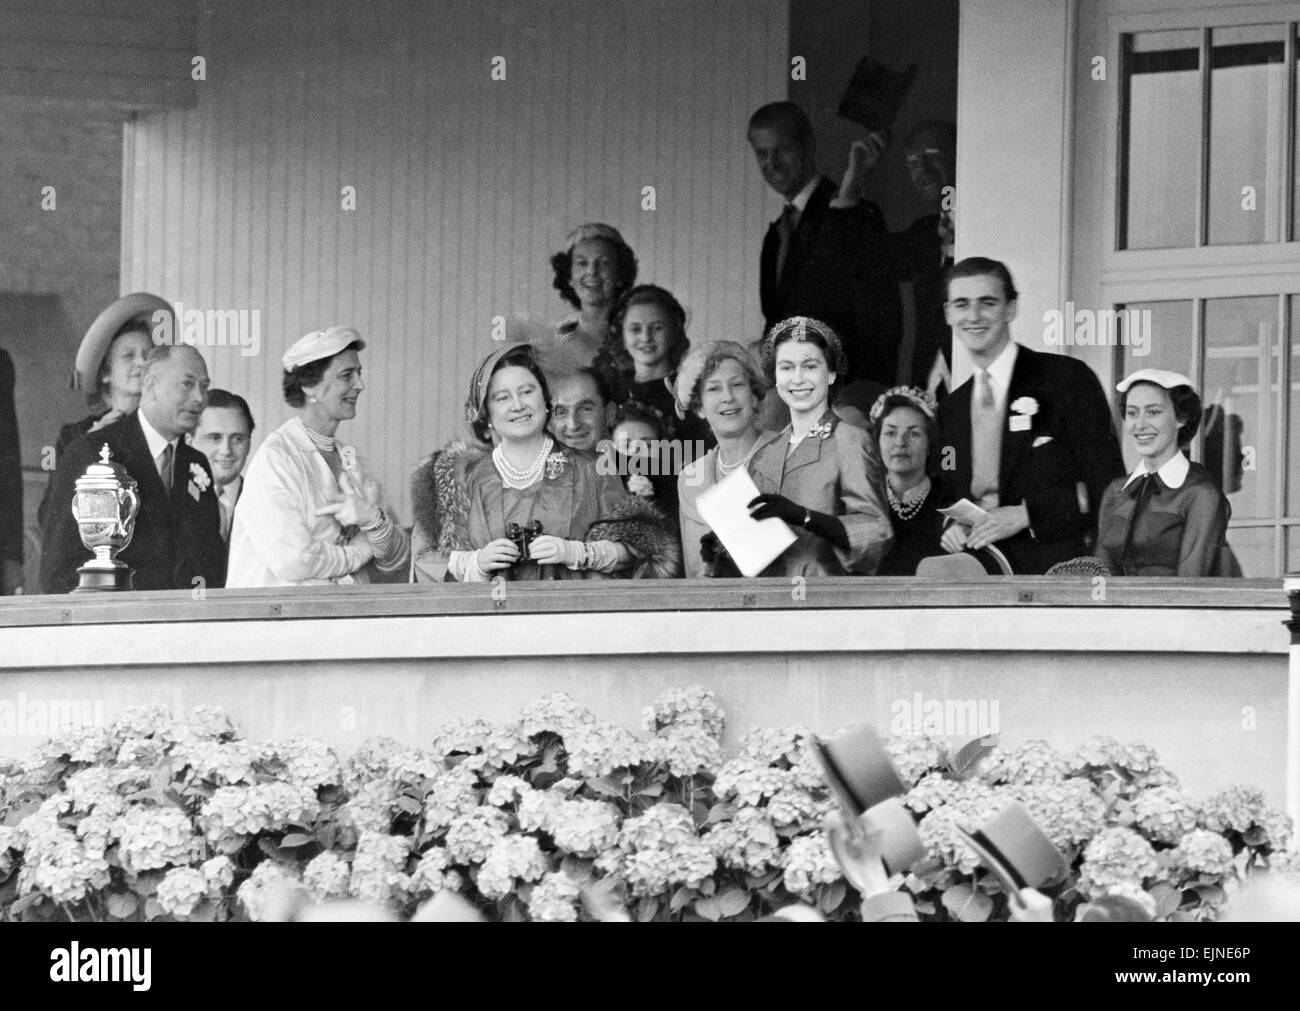 Her Majesty Queen Elizabeth II in happy mood at Ascot after her horse Choir Boy won the Royal Hunt Cup race. Among those who share the Queen's happiness in the Royal Box are the Duchess of Kent, the Queen Mother, the Princess Royal and the Duke of Devonshire. 18th June 1953. Stock Photo